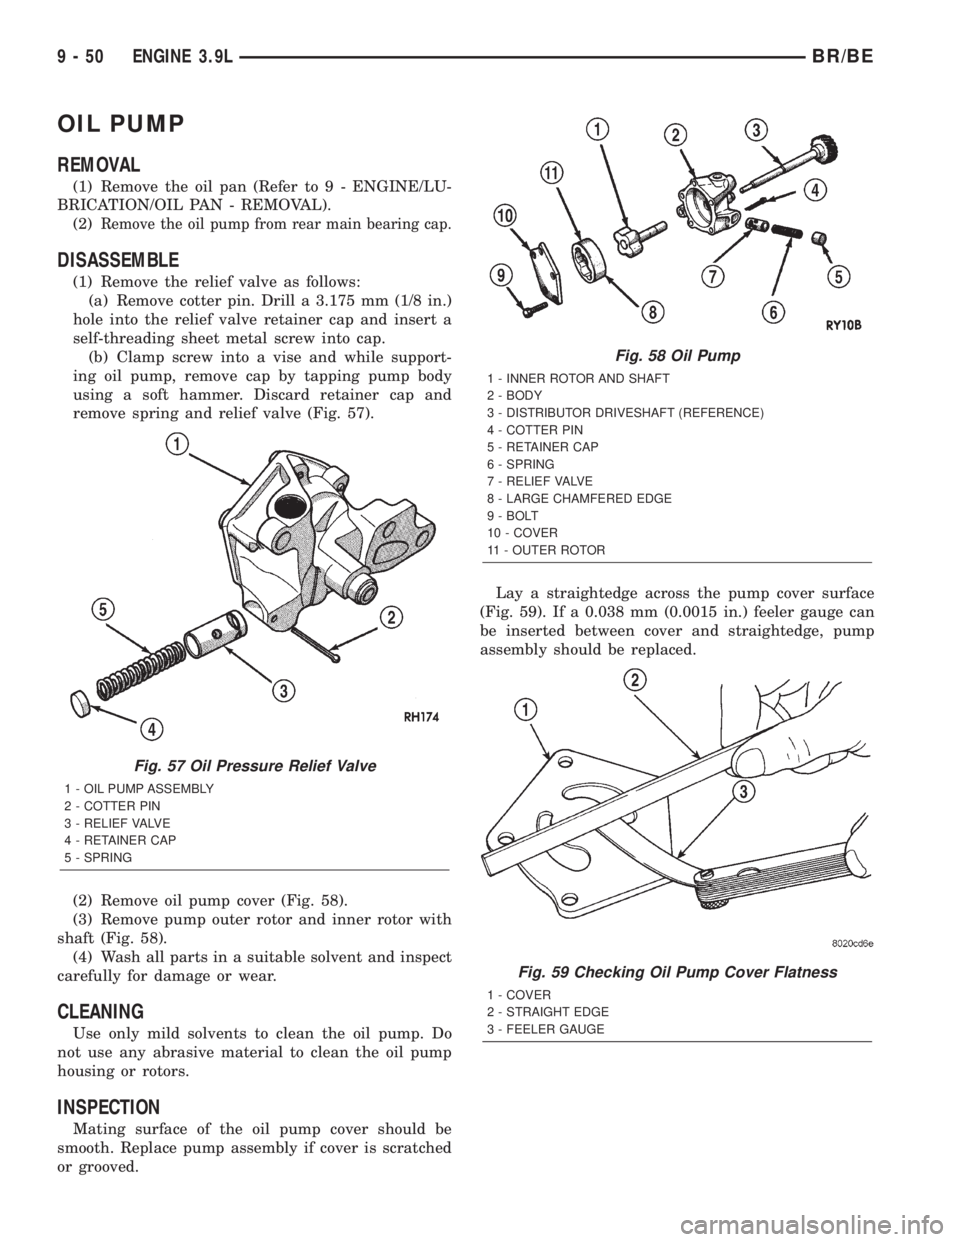 DODGE RAM 2001  Service Repair Manual OIL PUMP
REMOVAL
(1) Remove the oil pan (Refer to 9 - ENGINE/LU-
BRICATION/OIL PAN - REMOVAL).
(2)
Remove the oil pump from rear main bearing cap.
DISASSEMBLE
(1) Remove the relief valve as follows:
(